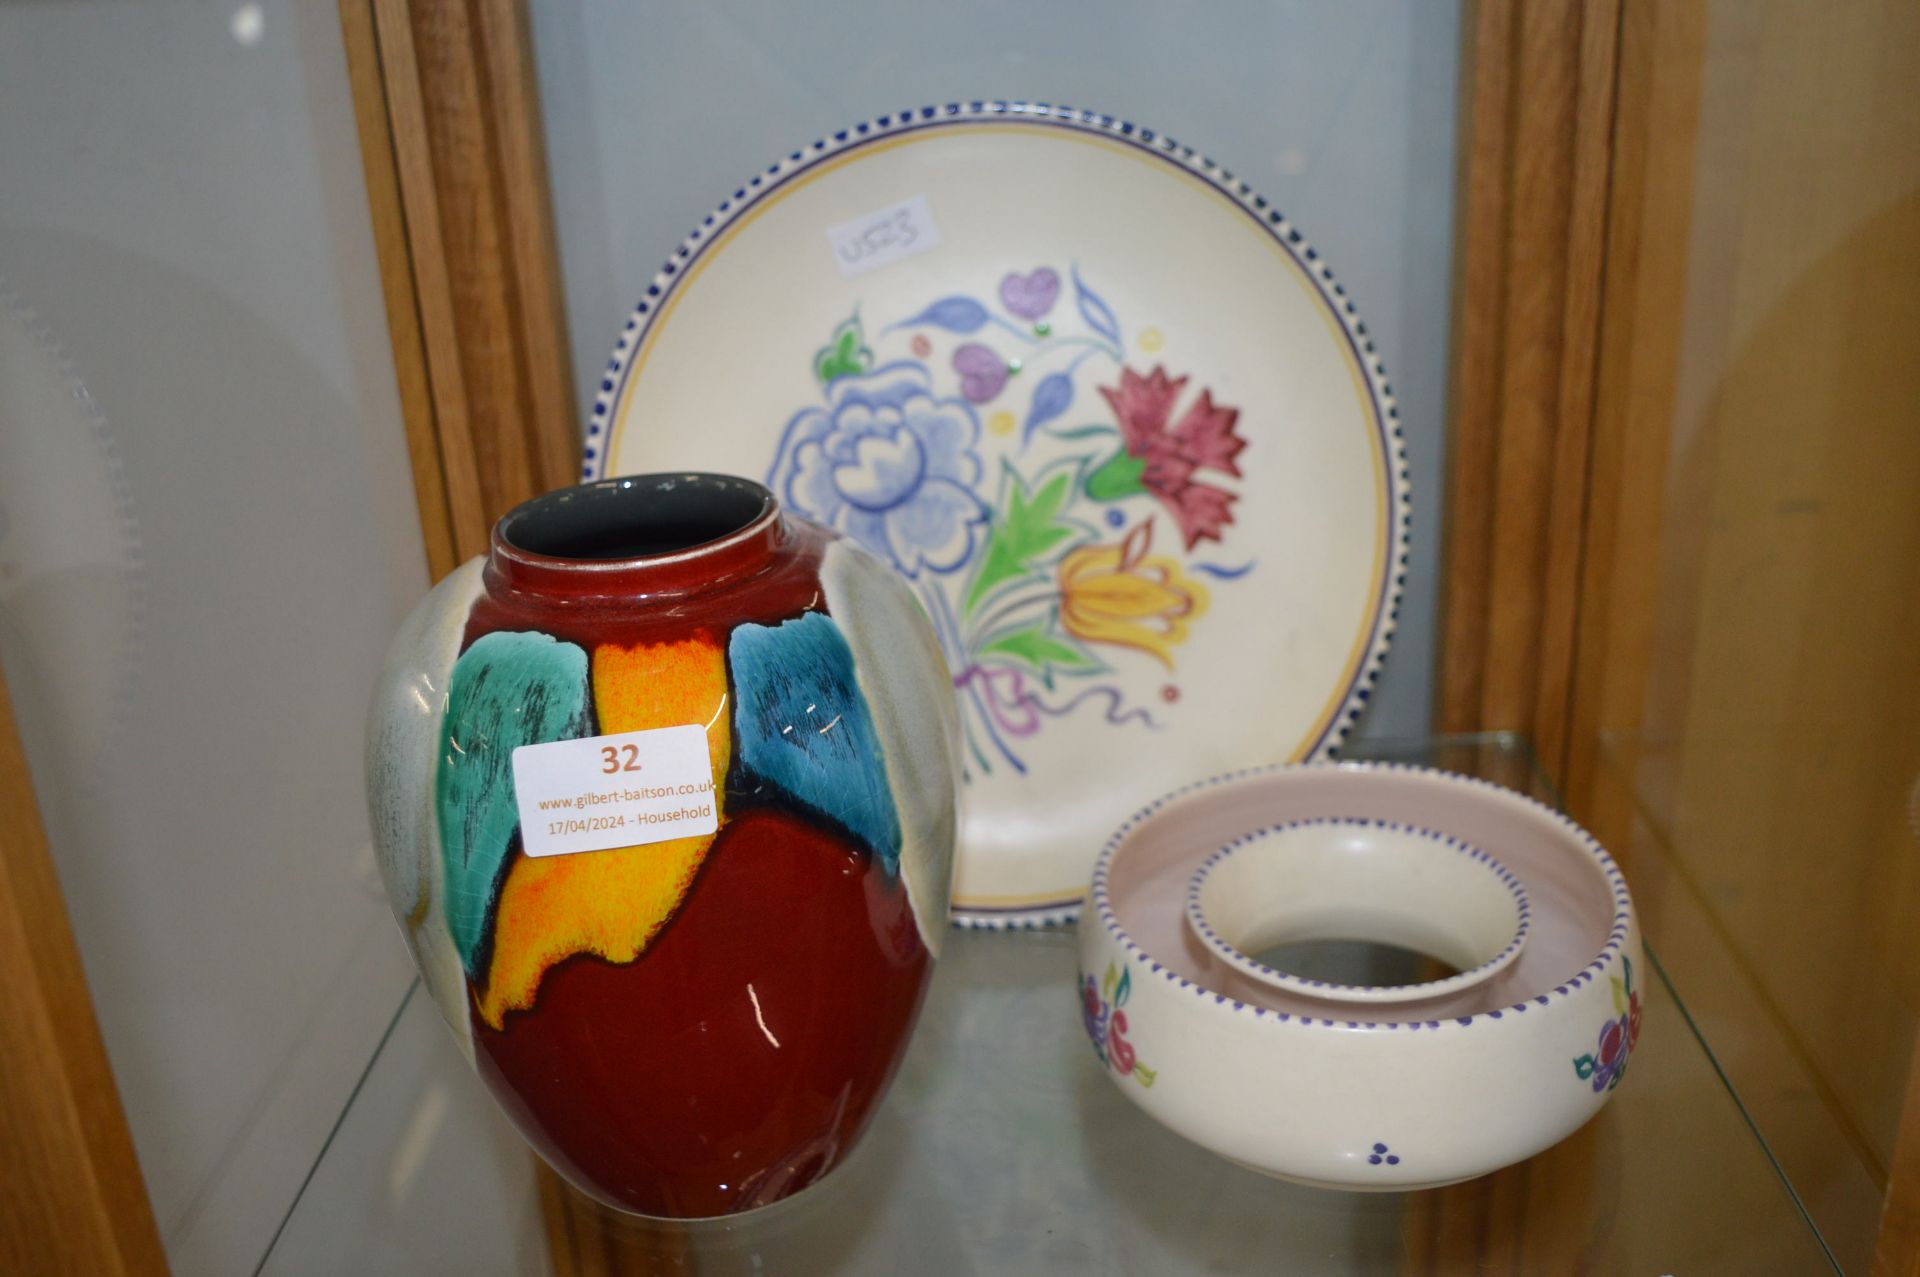 Poole Pottery Vase, Plate, and Posy Bowl